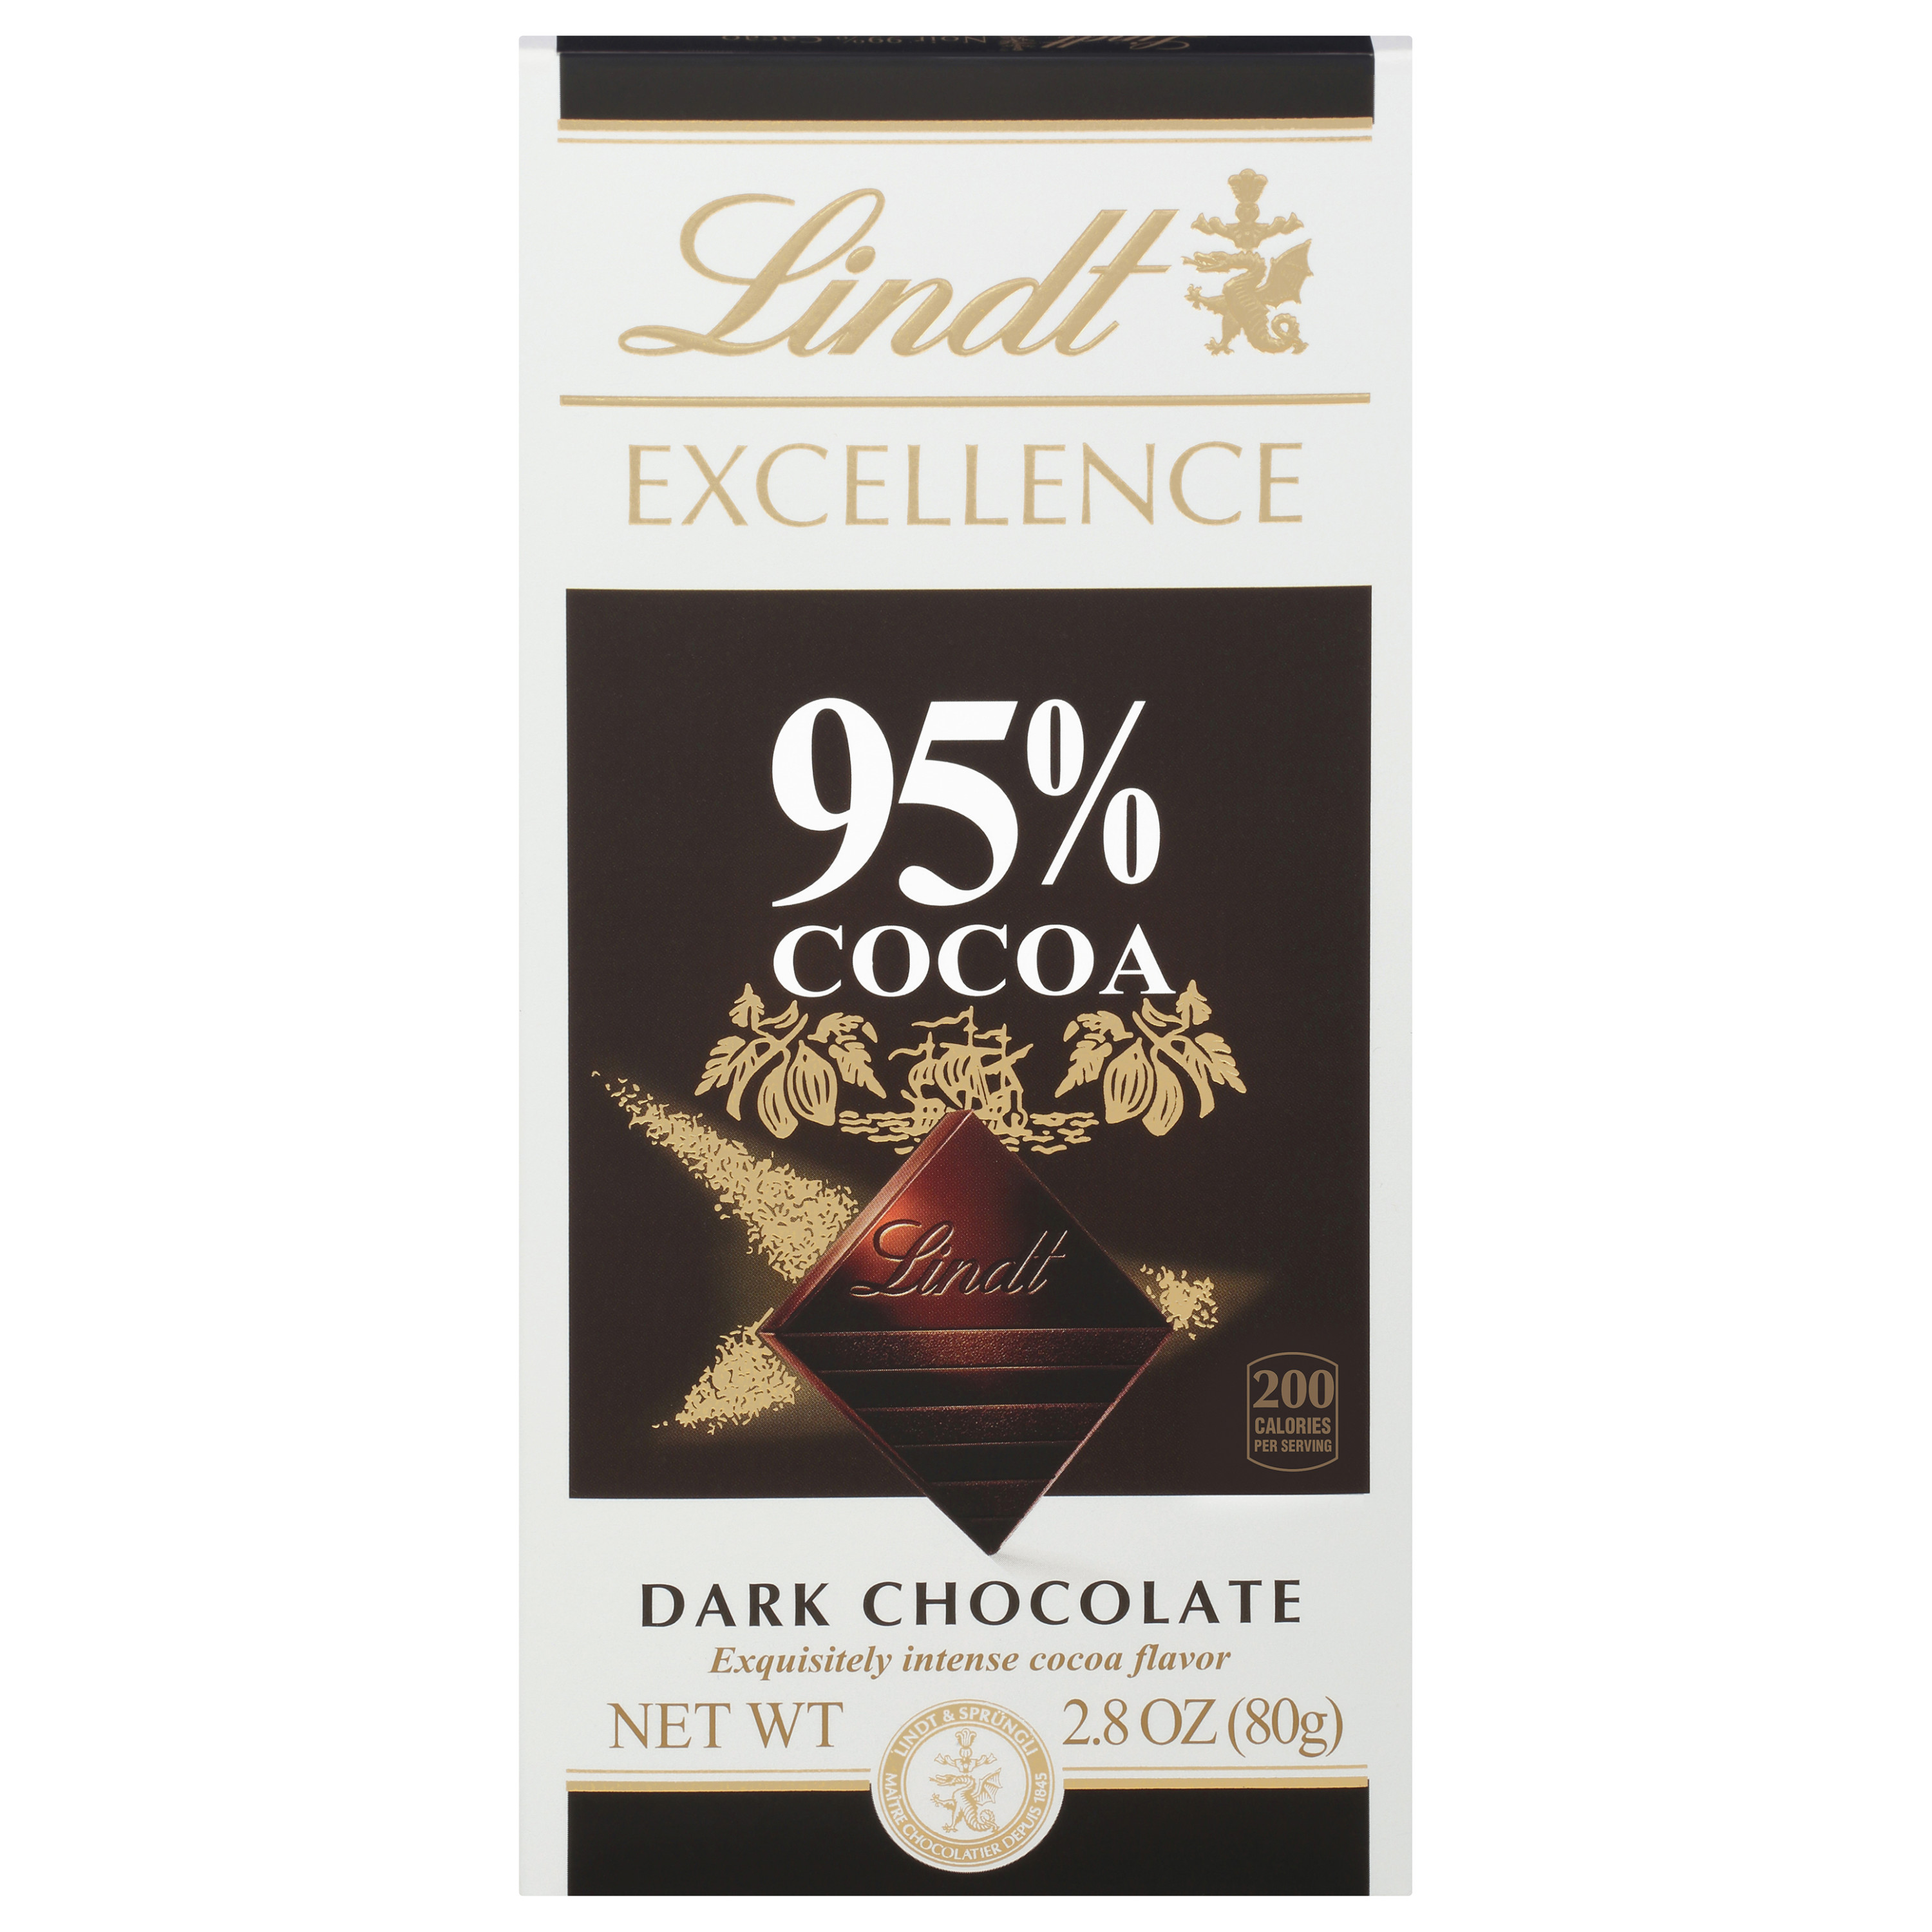 Lindt EXCELLENCE 95% Cocoa Dark Chocolate Candy Bar, 2.8 oz. Bar - image 1 of 16